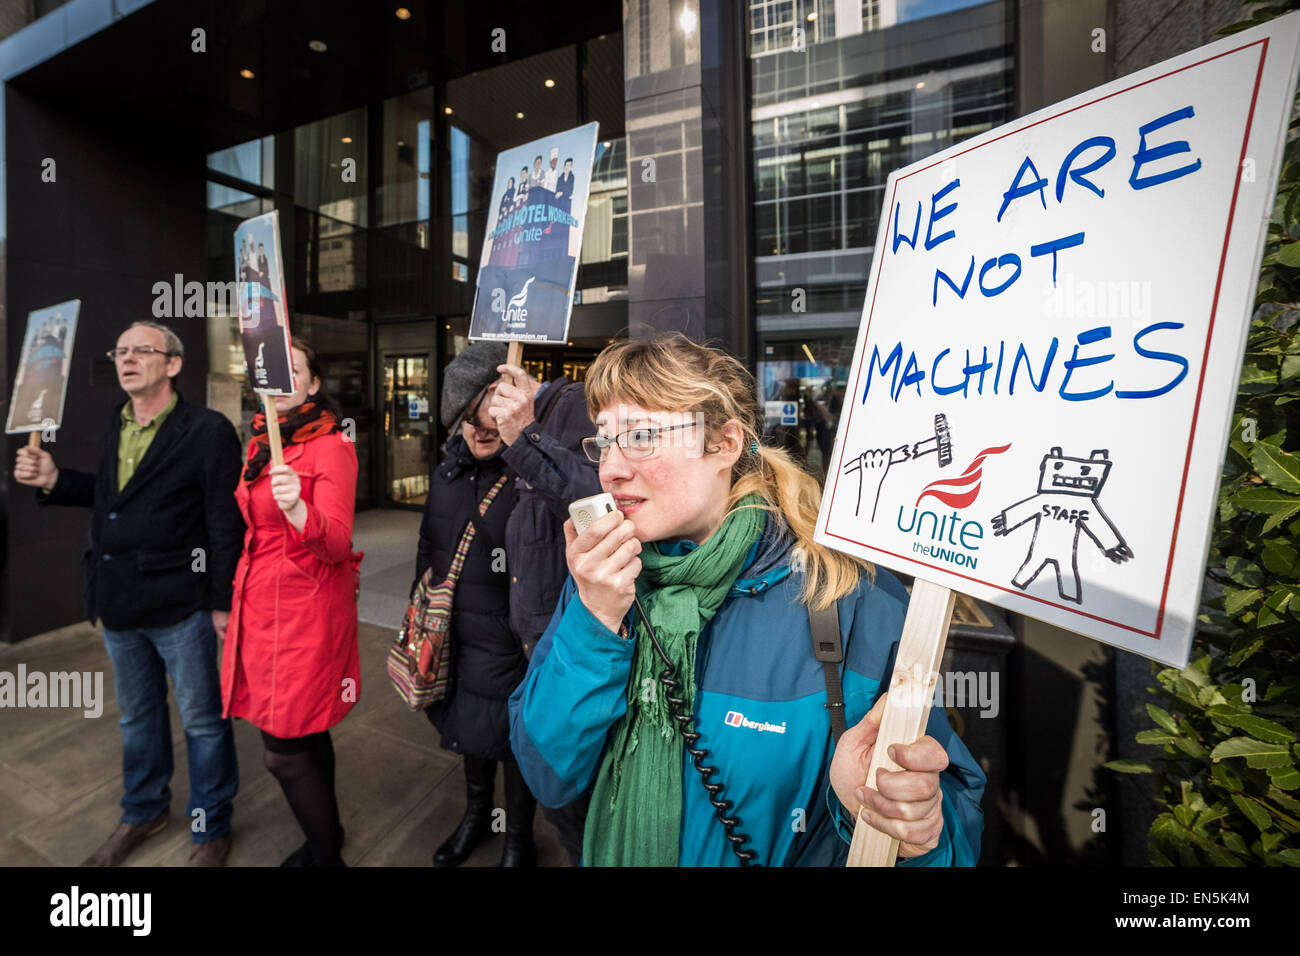 London, UK. 28th April, 2015. Workers Protest outside Hilton Metropole Hotel Credit:  Guy Corbishley/Alamy Live News Stock Photo